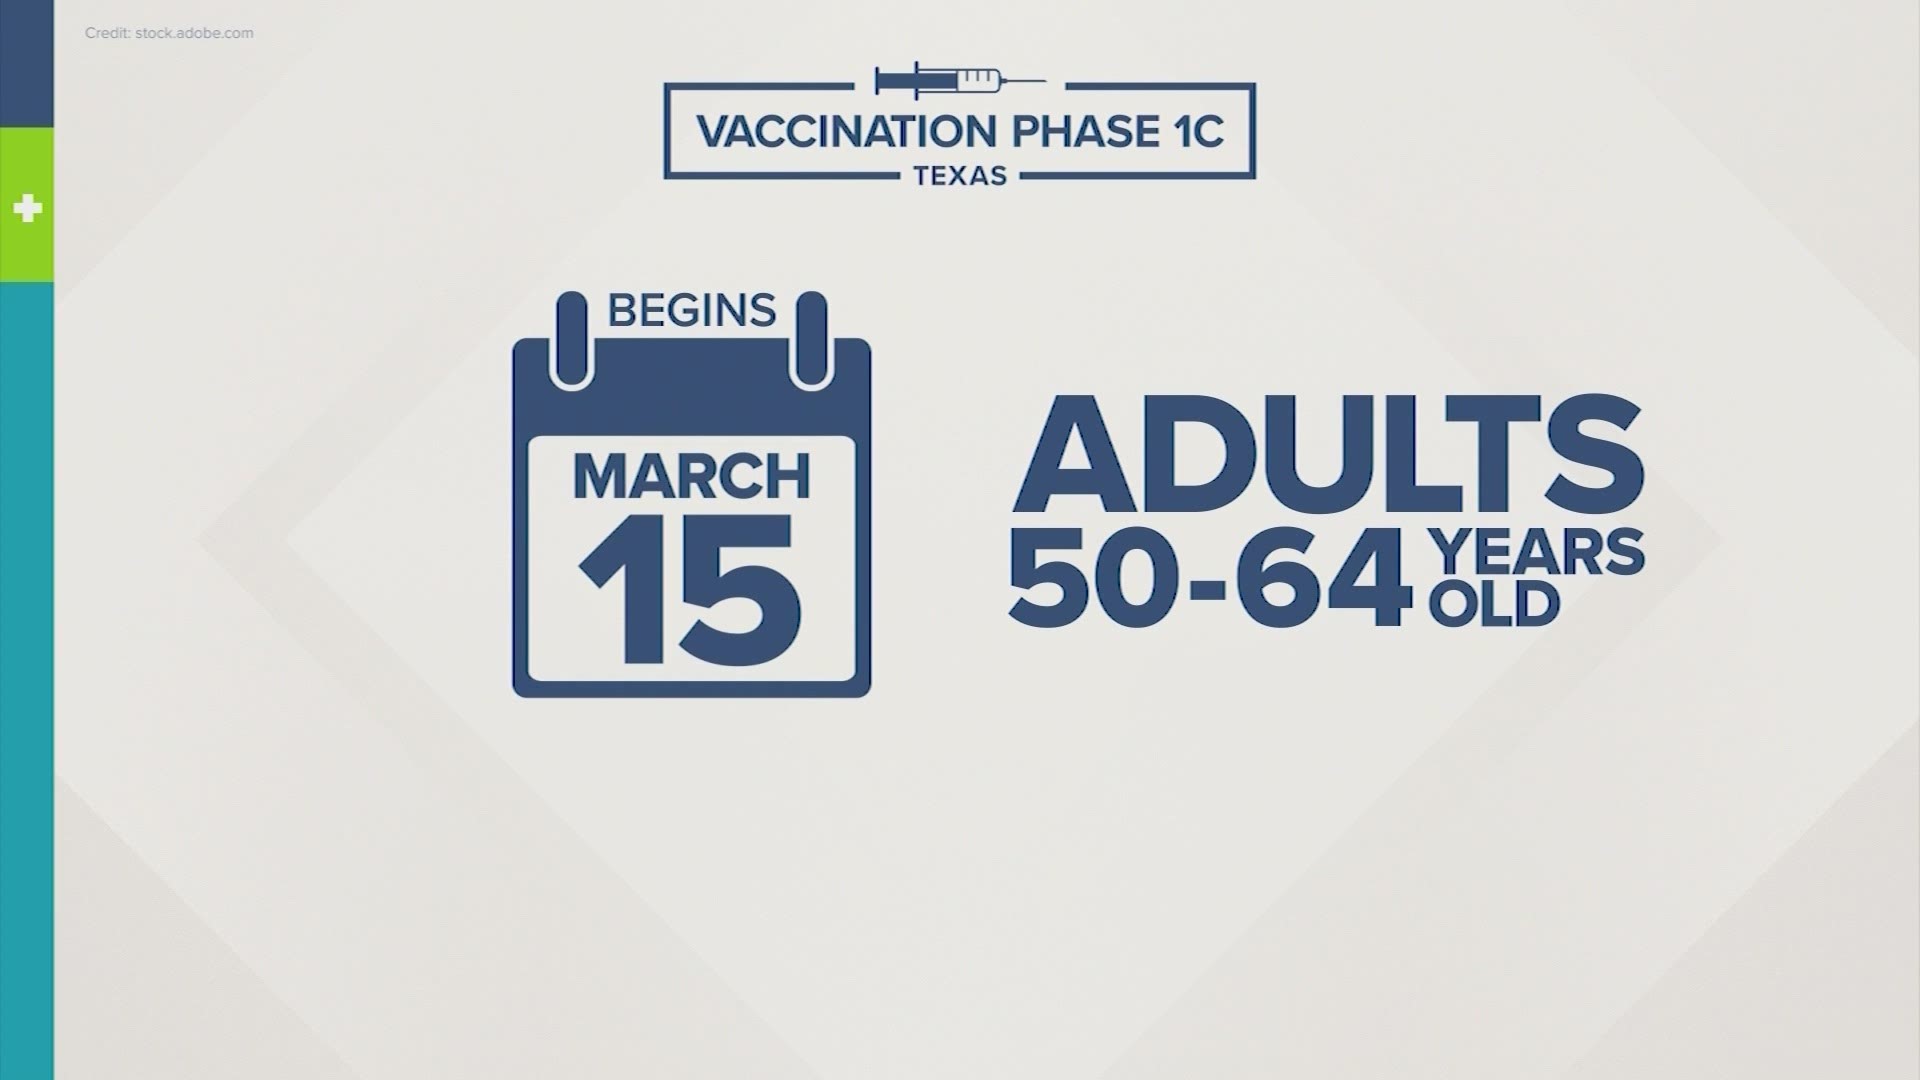 Several local vaccination hubs are already allowing people in group 1C to register for their waitlists.